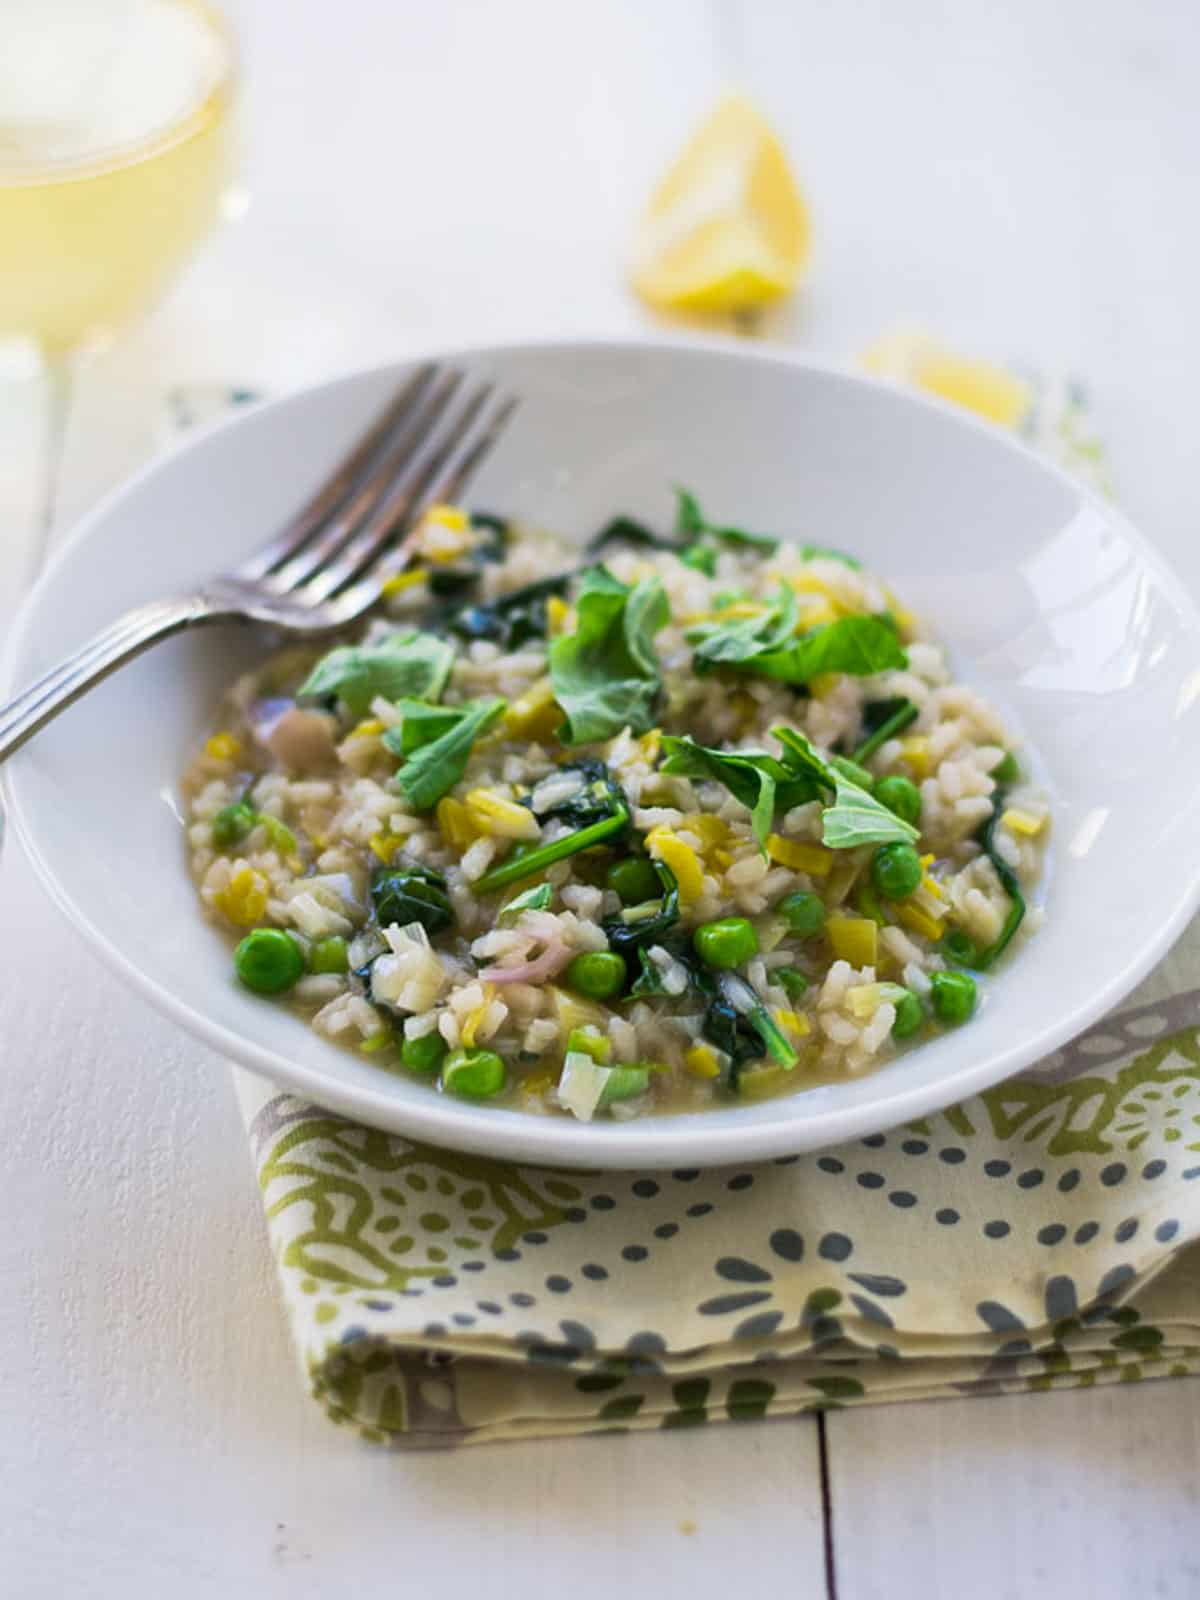 Lemon spinach risotto with peas and parmesan.